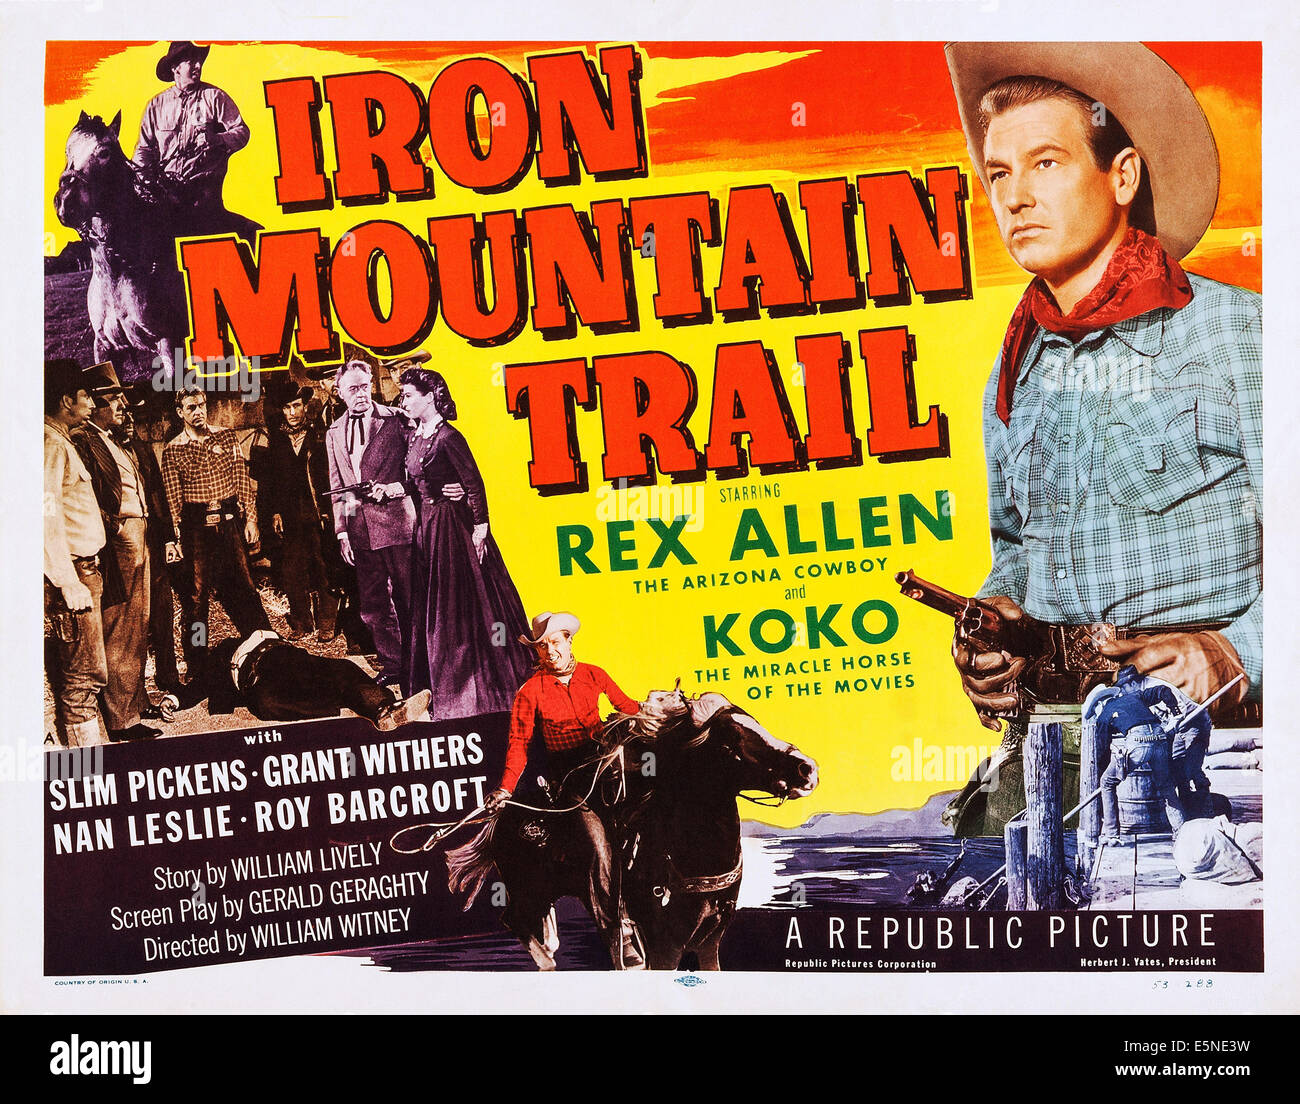 IRON MOUNTAIN TRAIL, Slim Pickens (top left), Rex Allen (right), Koko the Miracle Horse of the Movies, 1953 Stock Photo